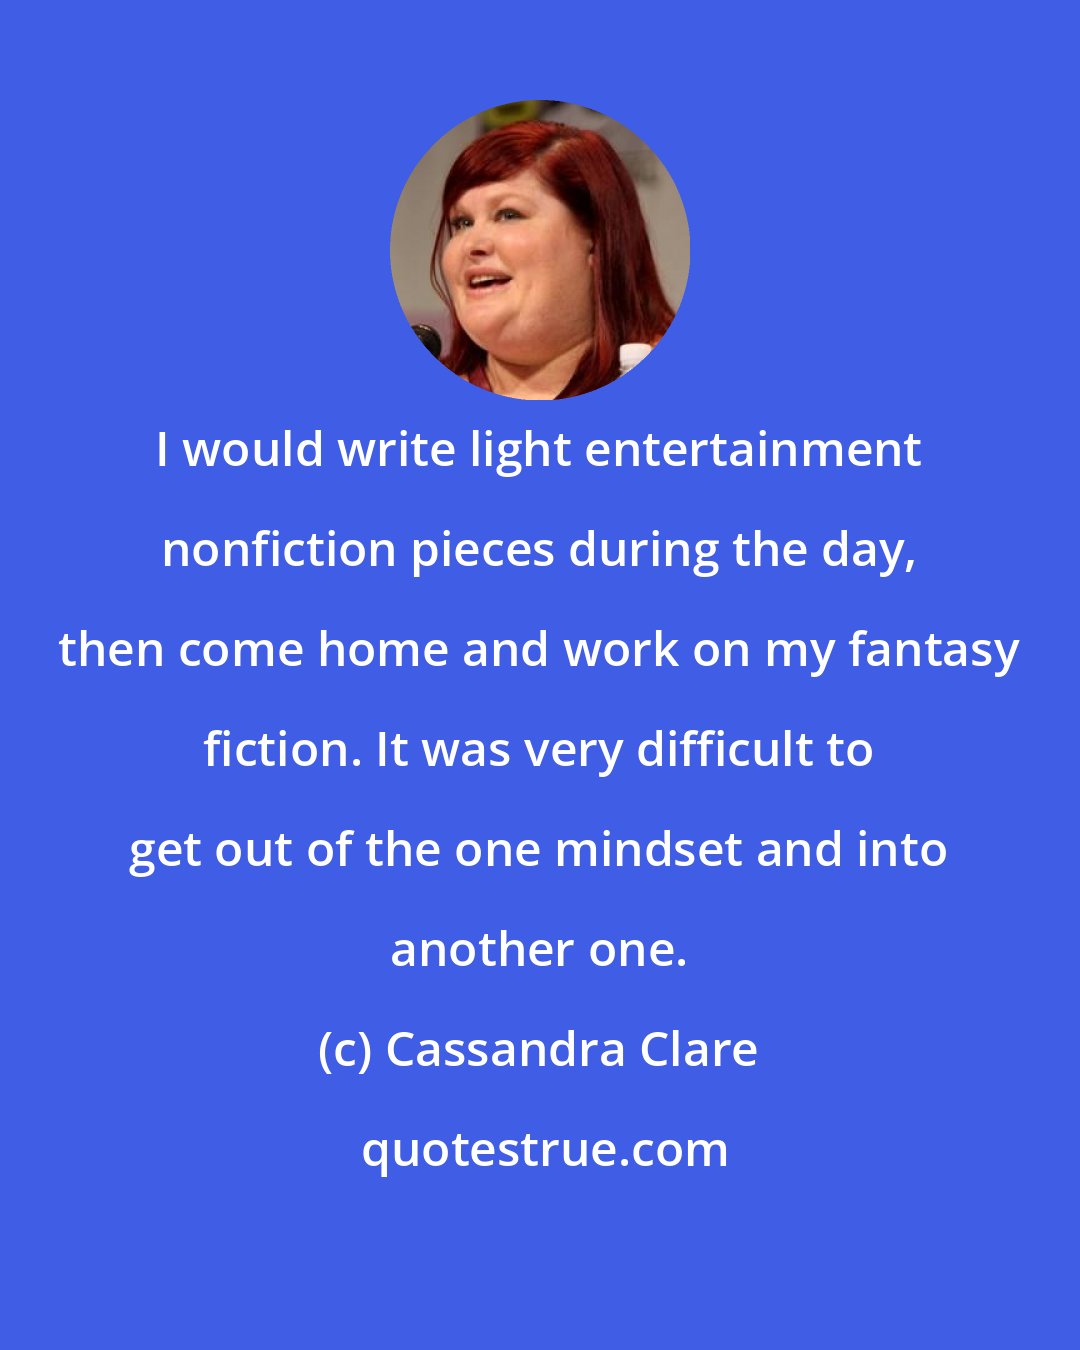 Cassandra Clare: I would write light entertainment nonfiction pieces during the day, then come home and work on my fantasy fiction. It was very difficult to get out of the one mindset and into another one.